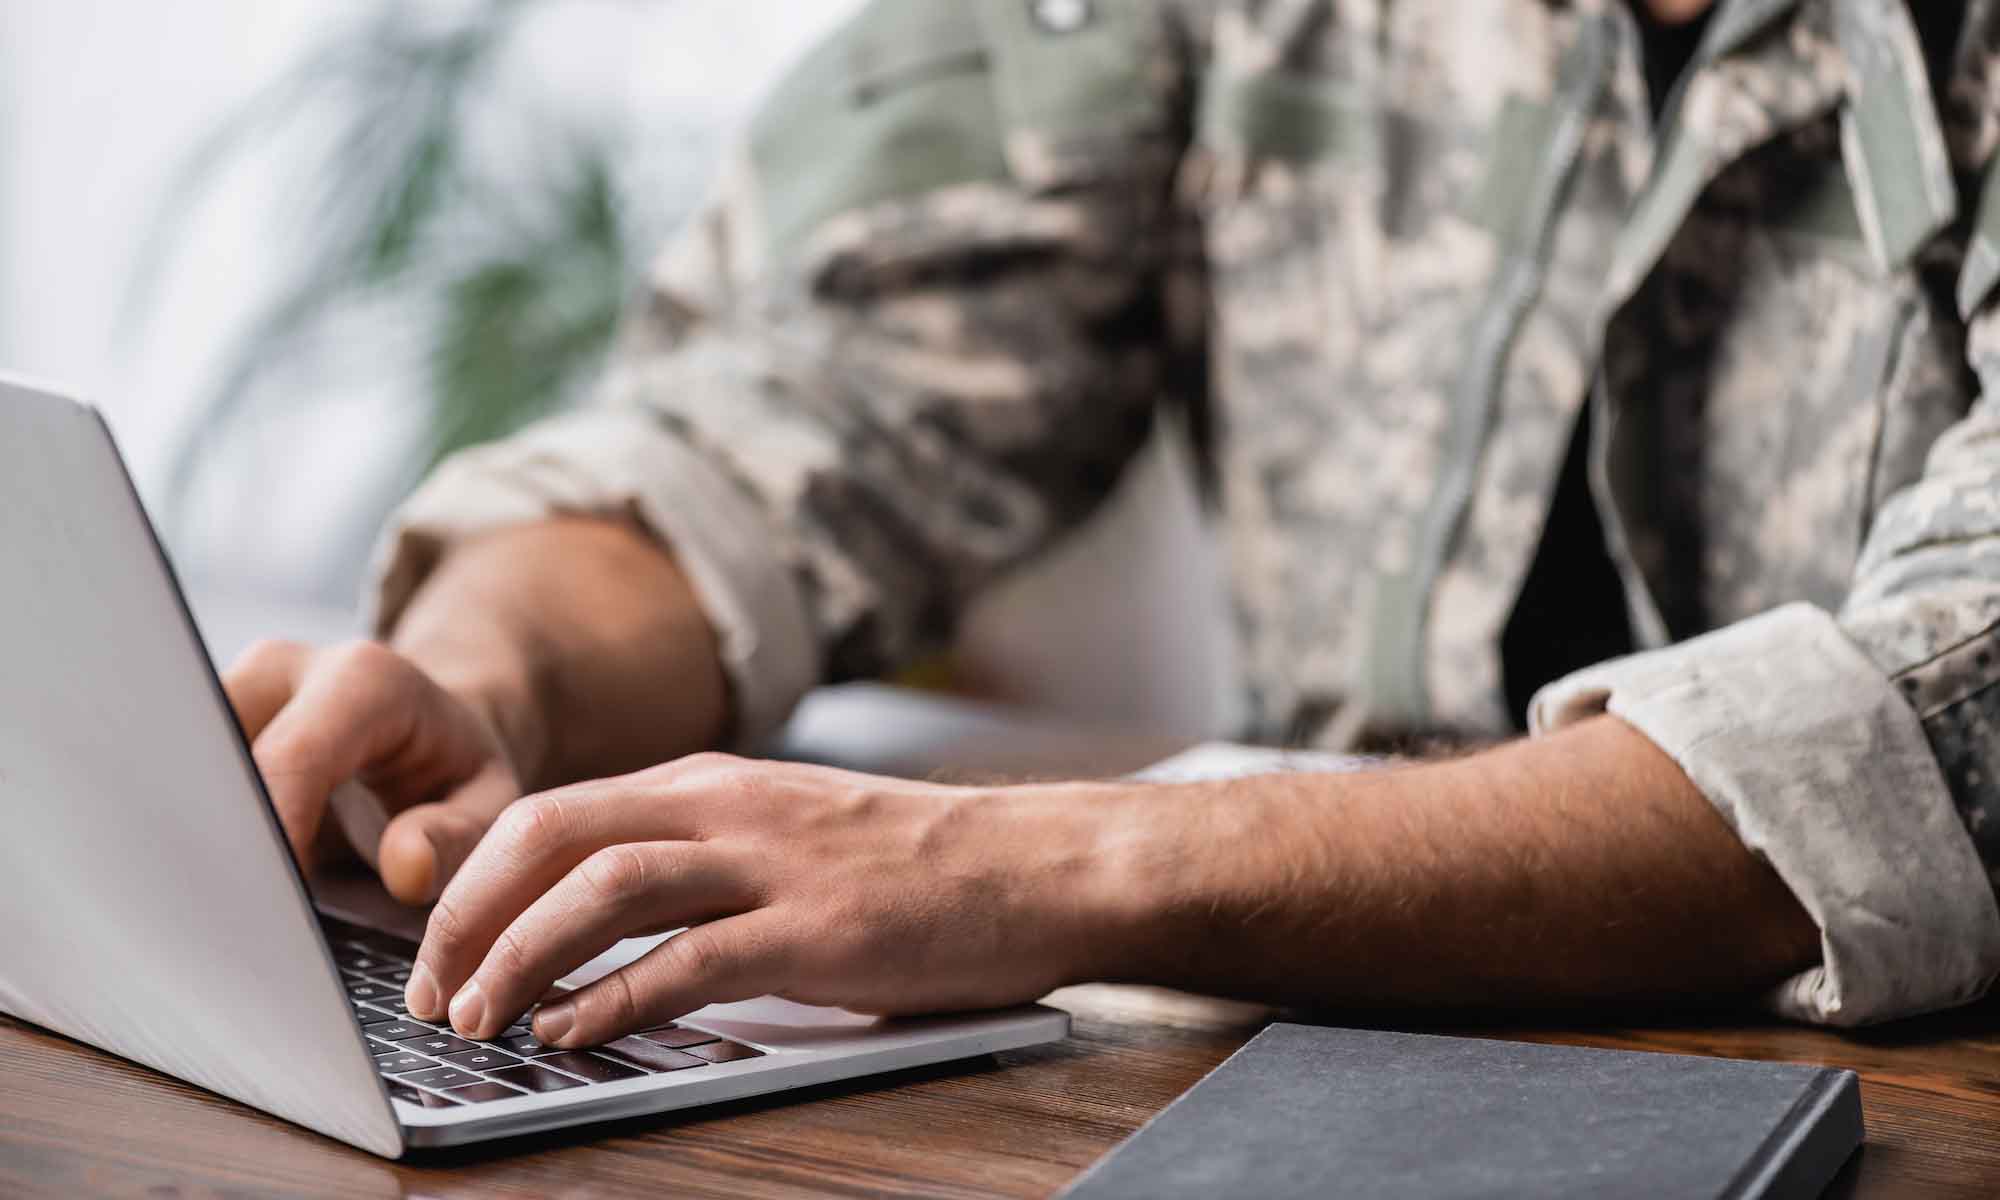 Person in military gear working on laptop